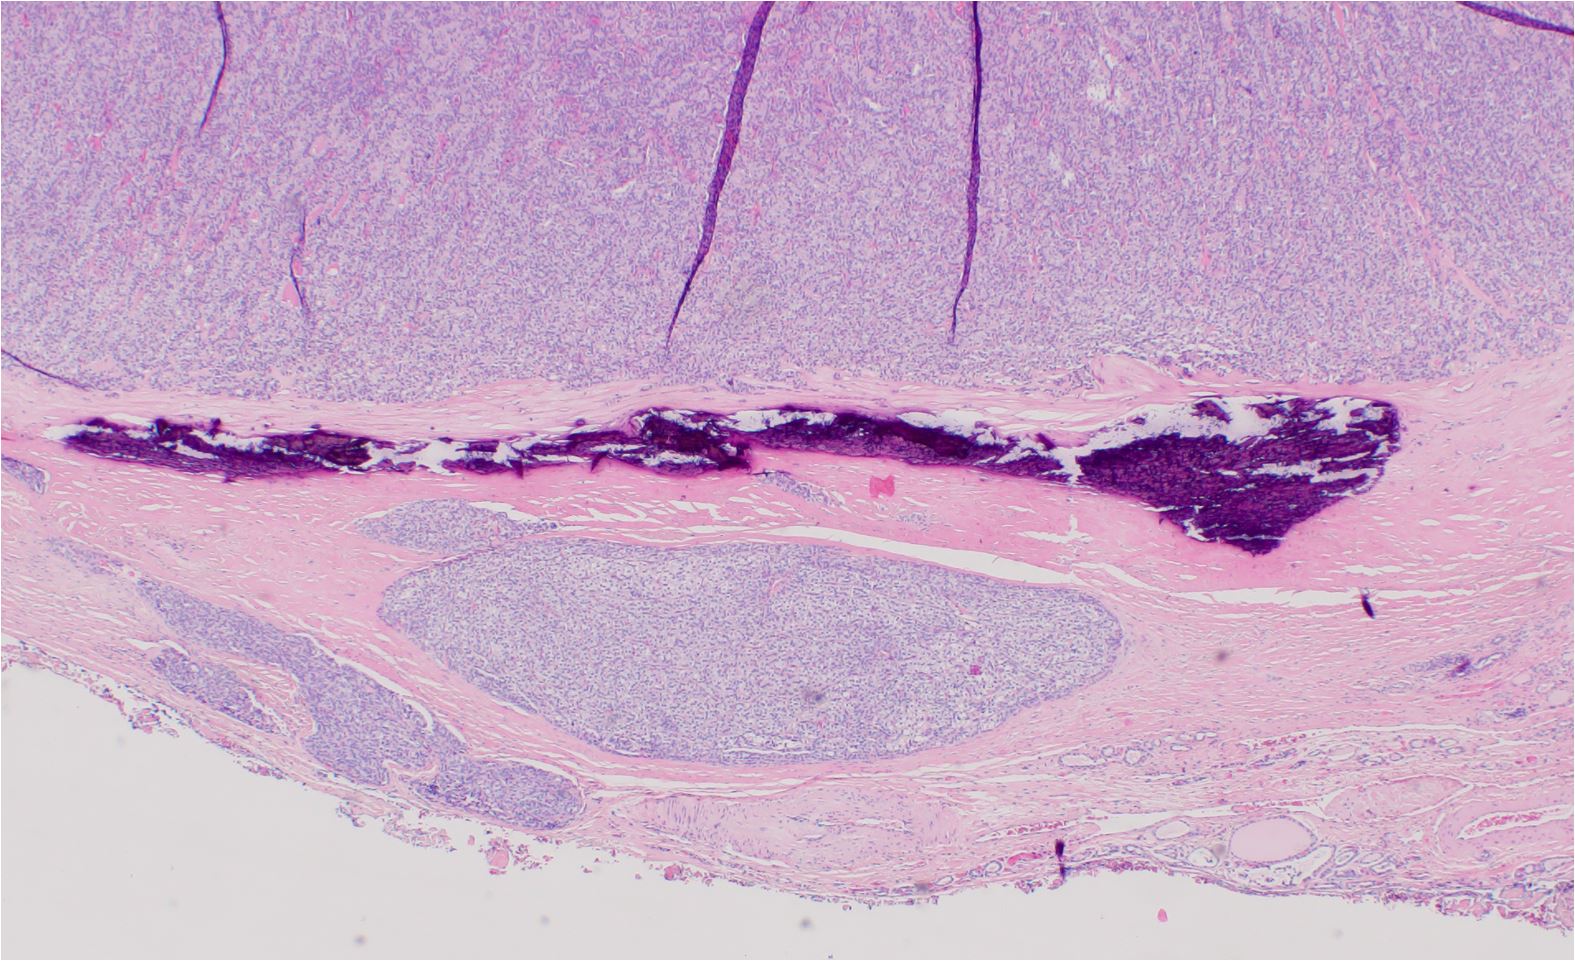 Follicular carcinoma of the thyroid with capsular invasion